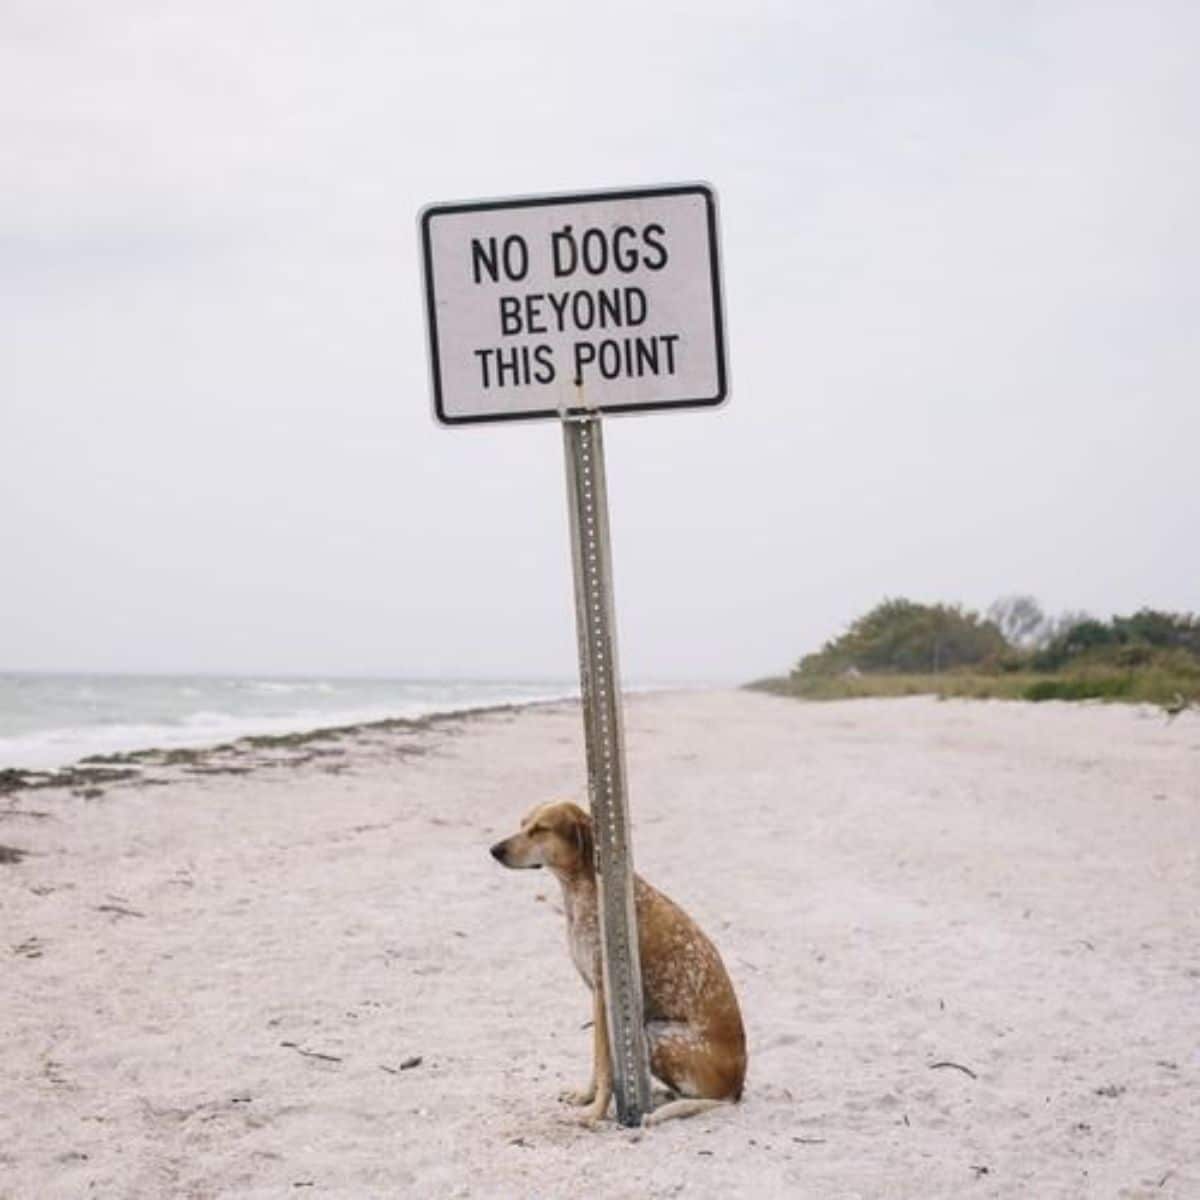 brown and white coonhound sitting on a beach by a NO DOGS BEYOND THIS POINT sign